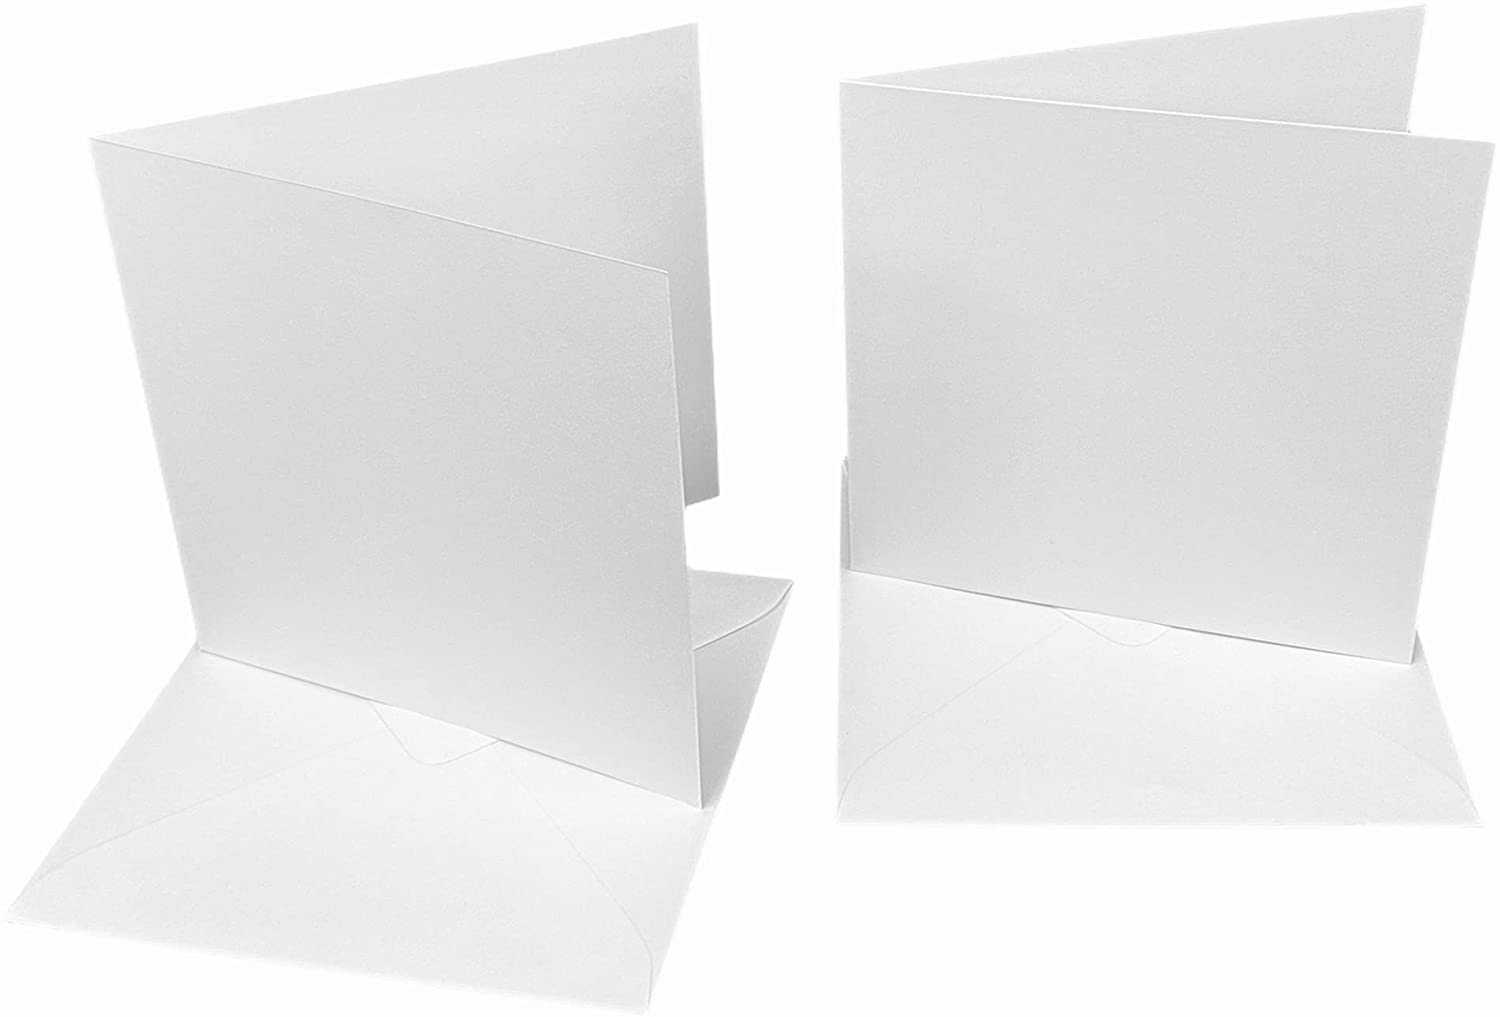 6X6 Creased Card and Envelopes